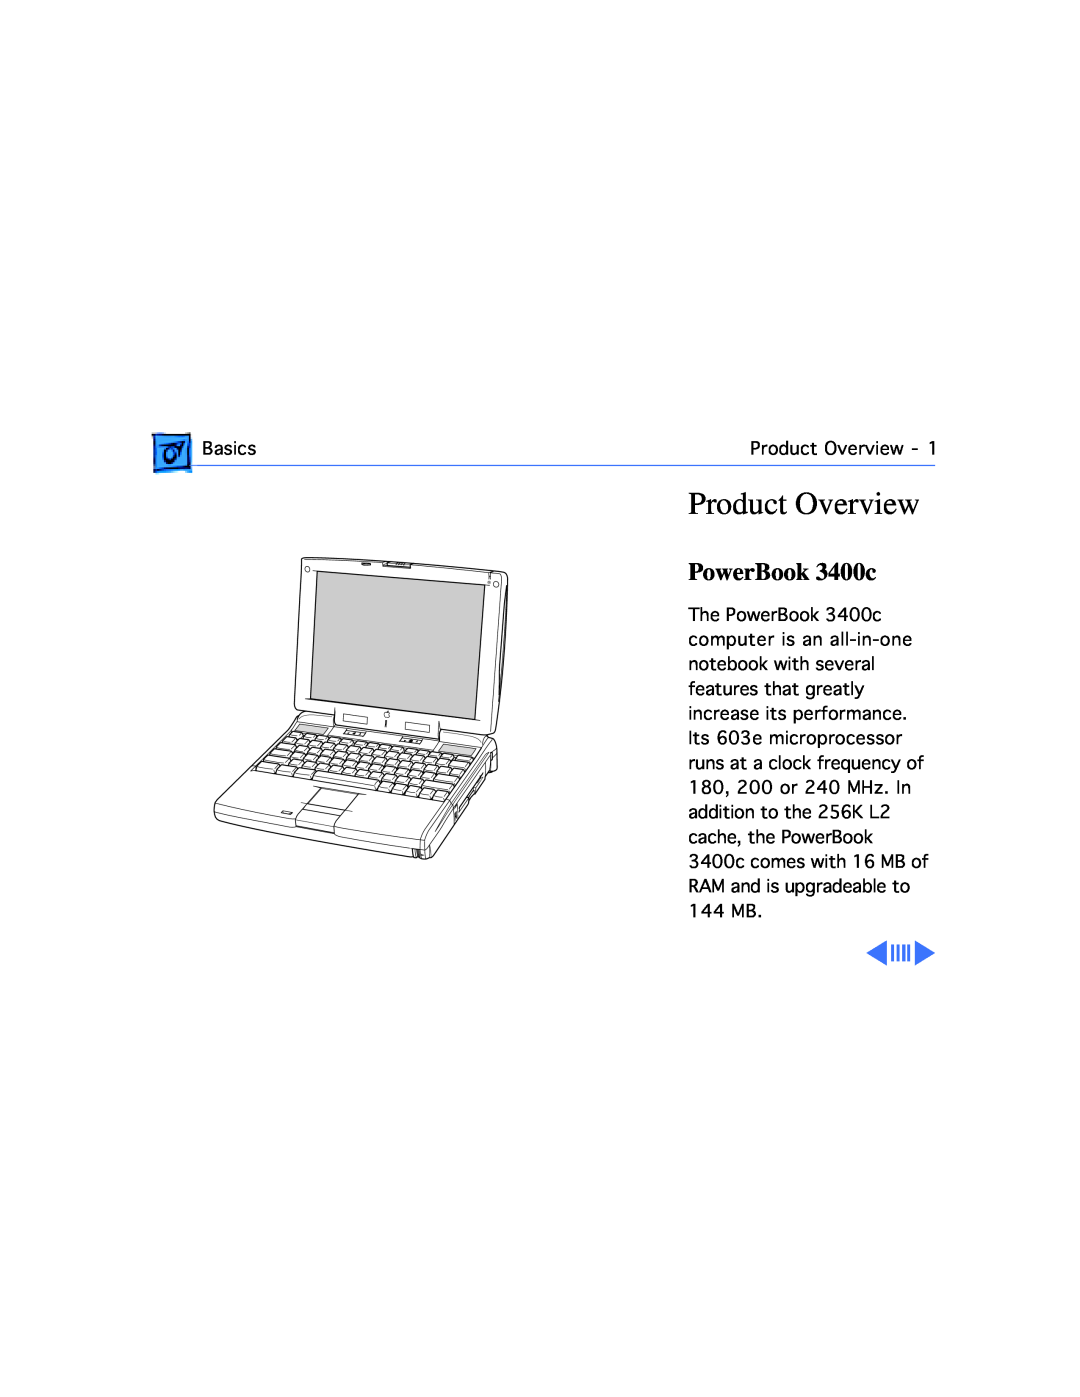 Apple 3400C/200, G3 manual Product Overview, PowerBook 3400c, Basics 